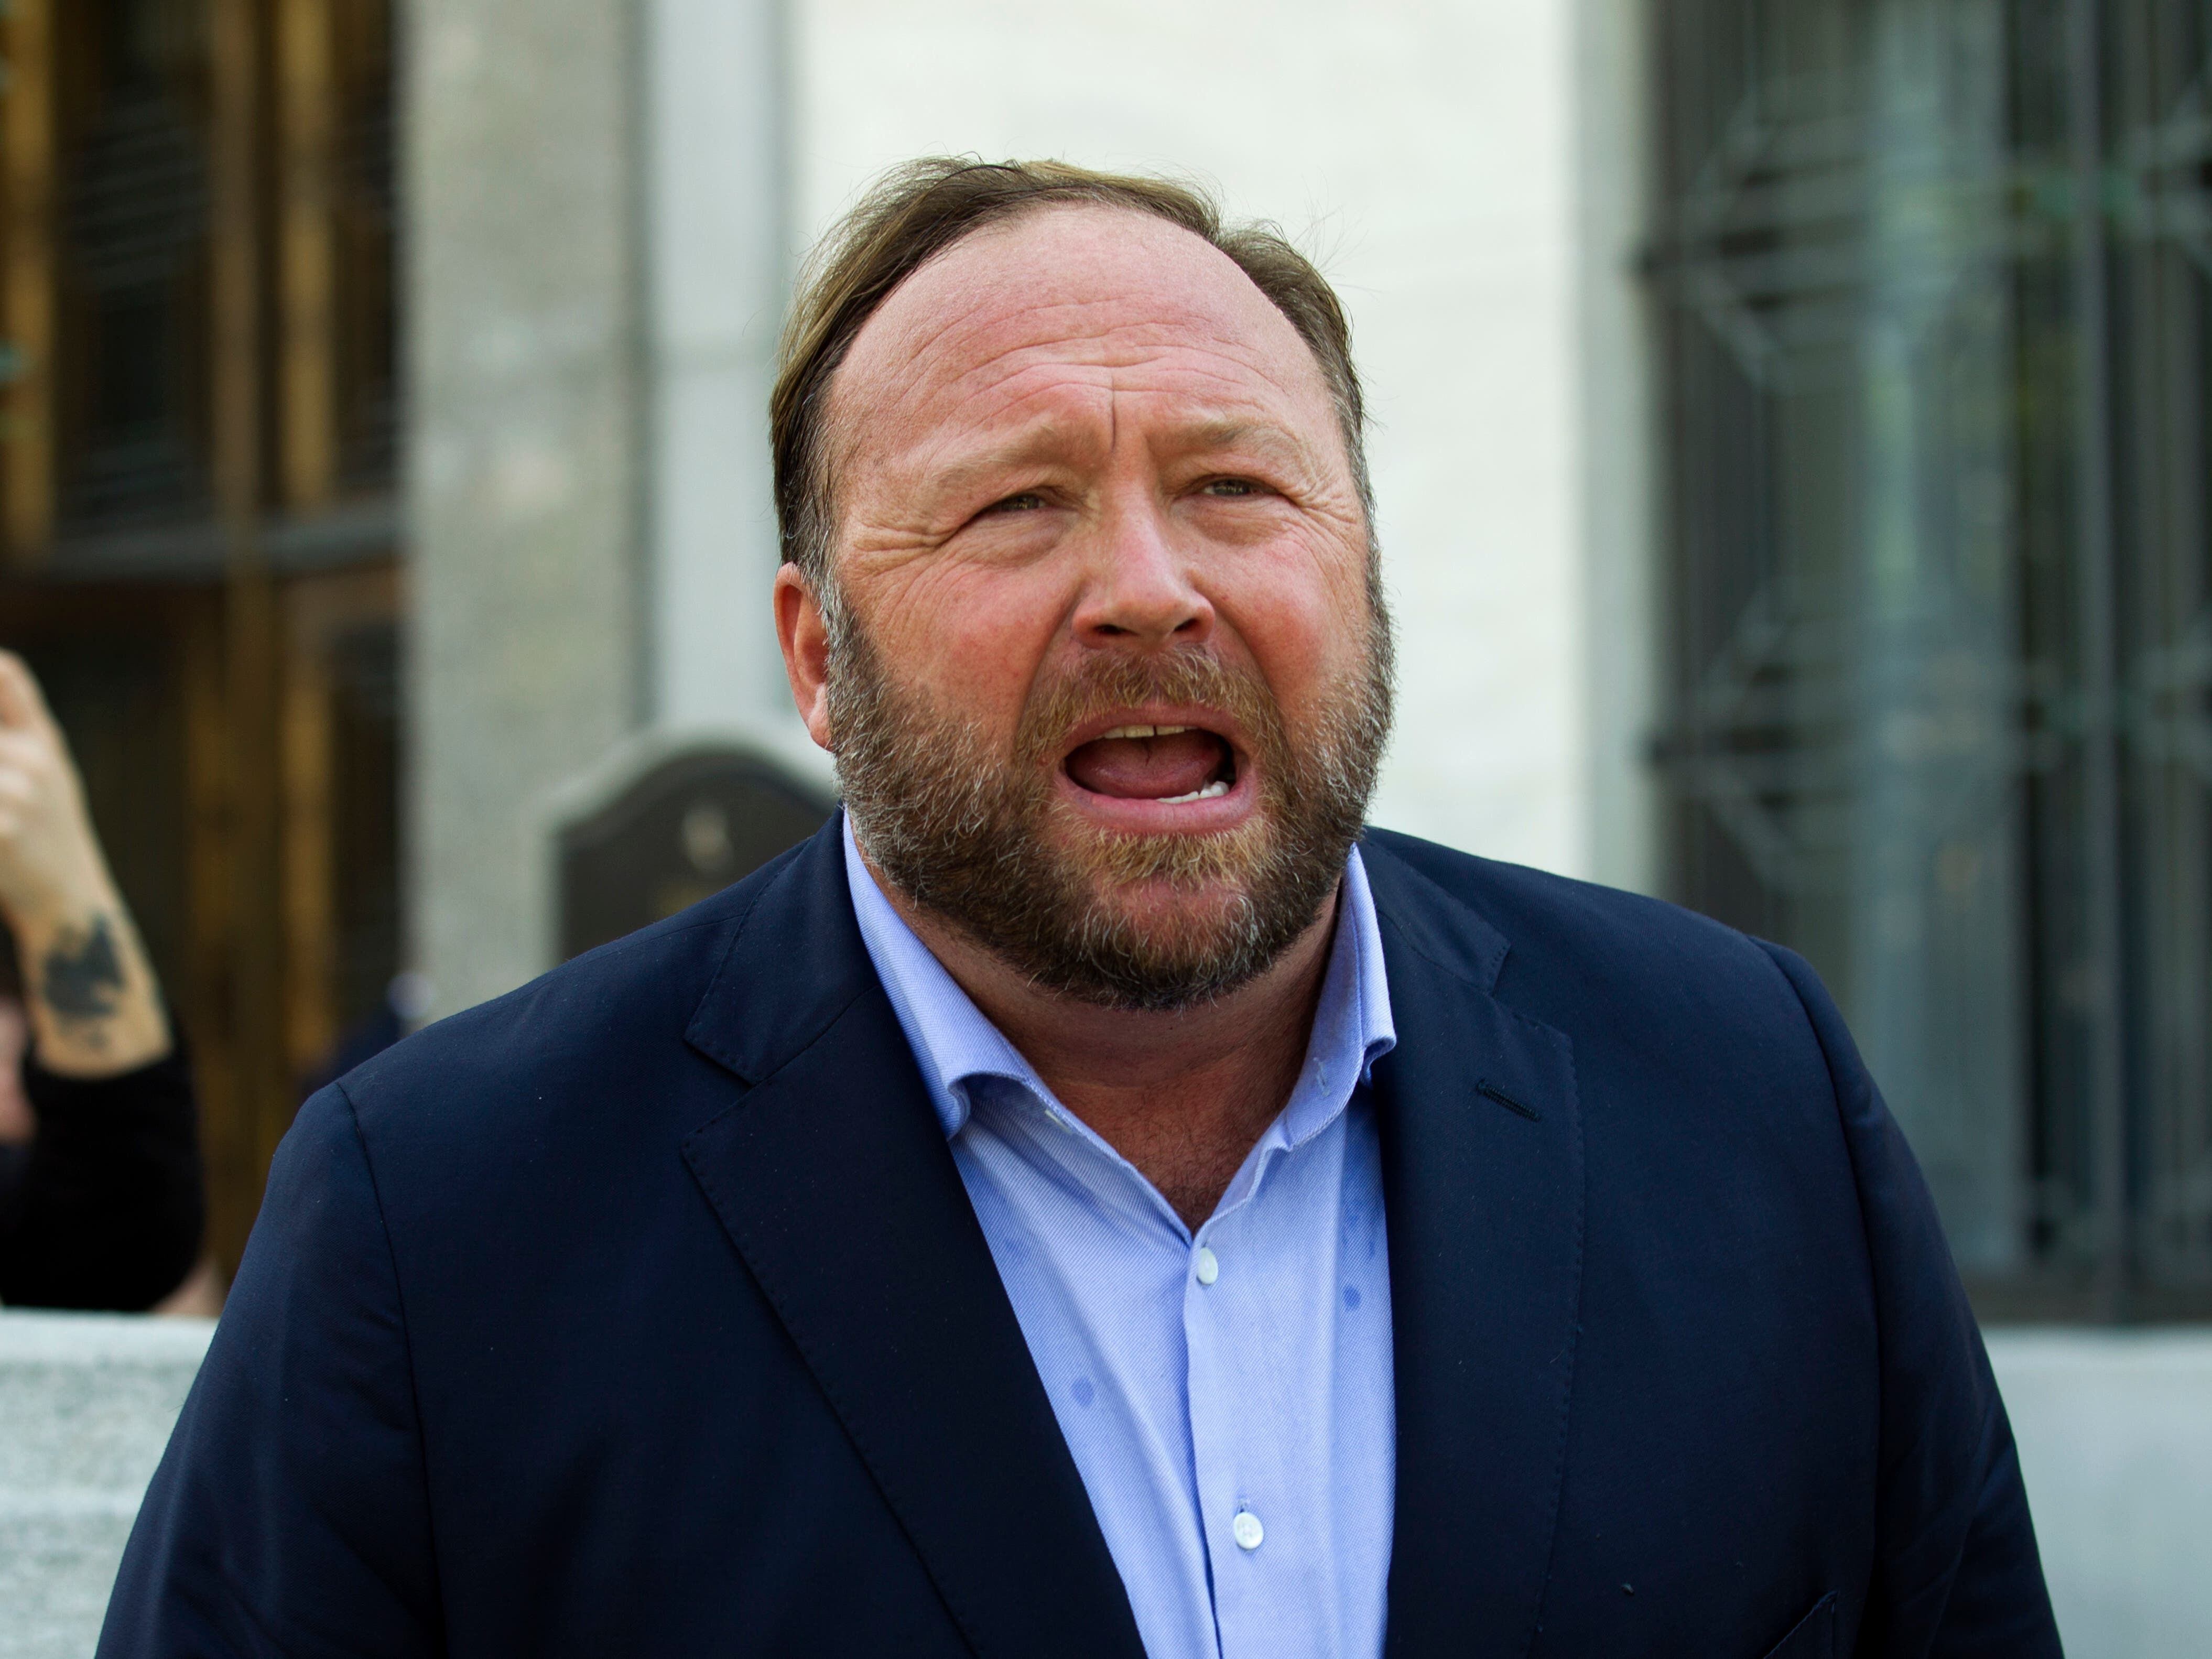 Conspiracy website Infowars files for bankruptcy as founder faces libel lawsuits